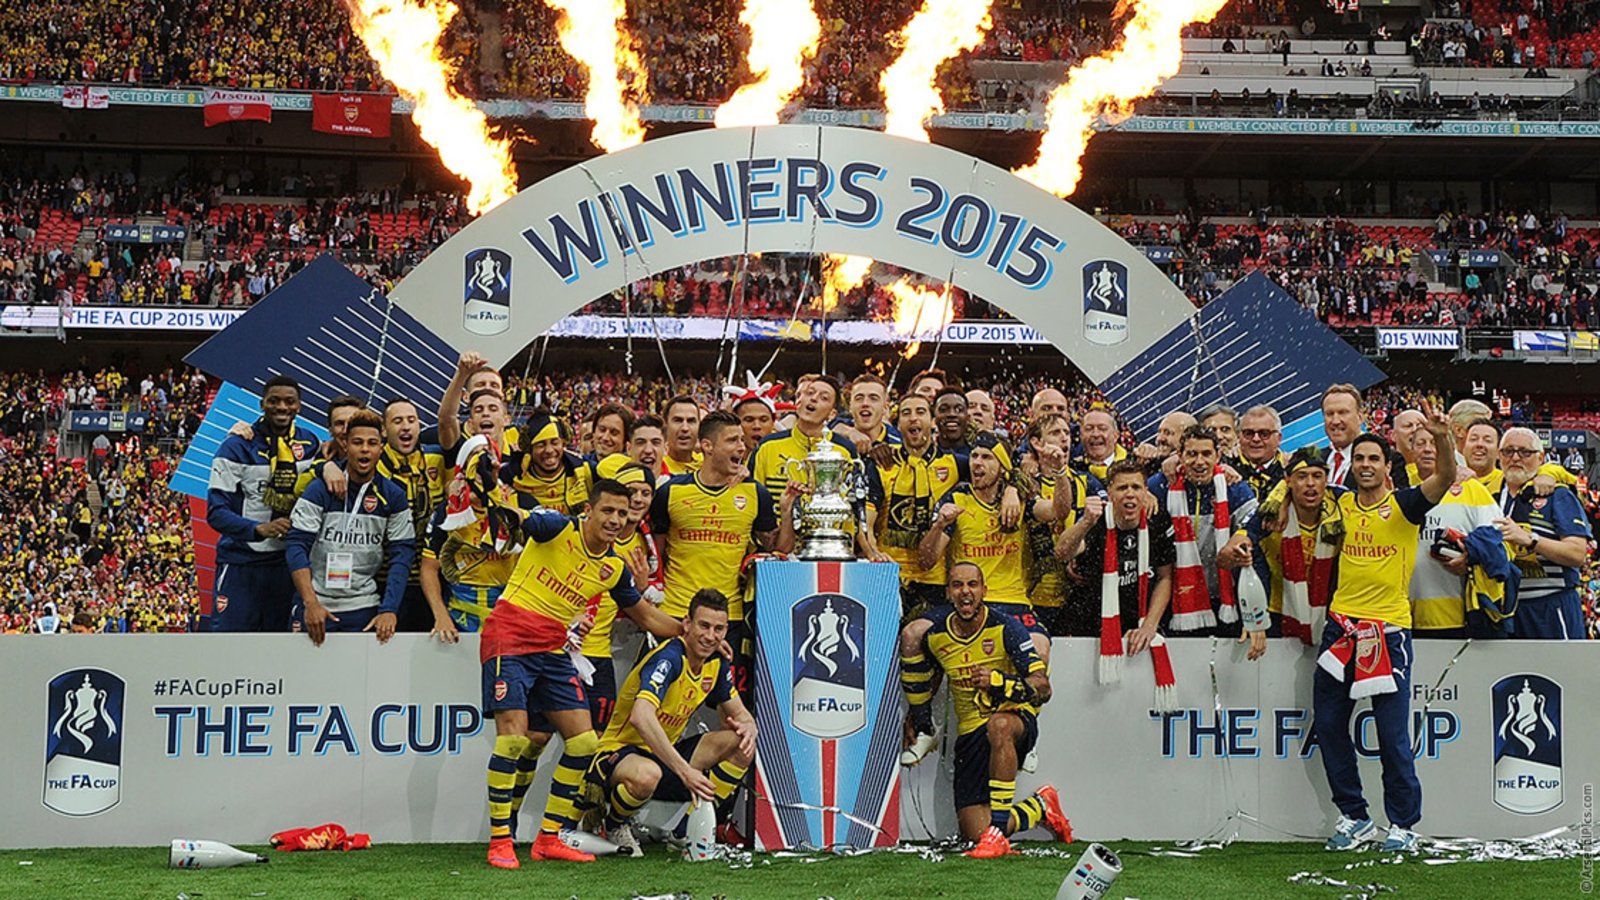 Three FA Cup wins in years | History | News | Arsenal.com